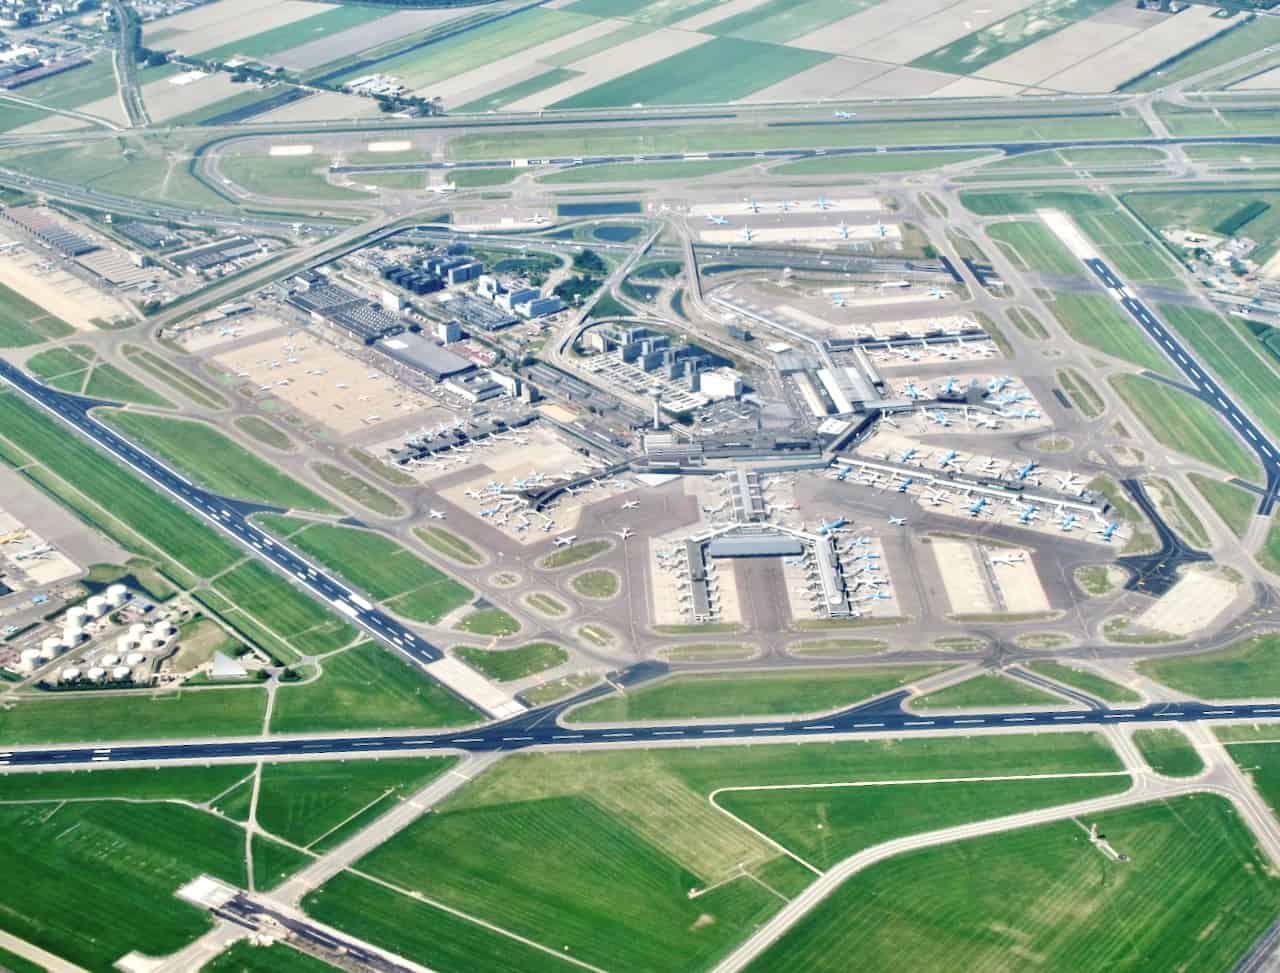 how far is amsterdam airport from amsterdam city center